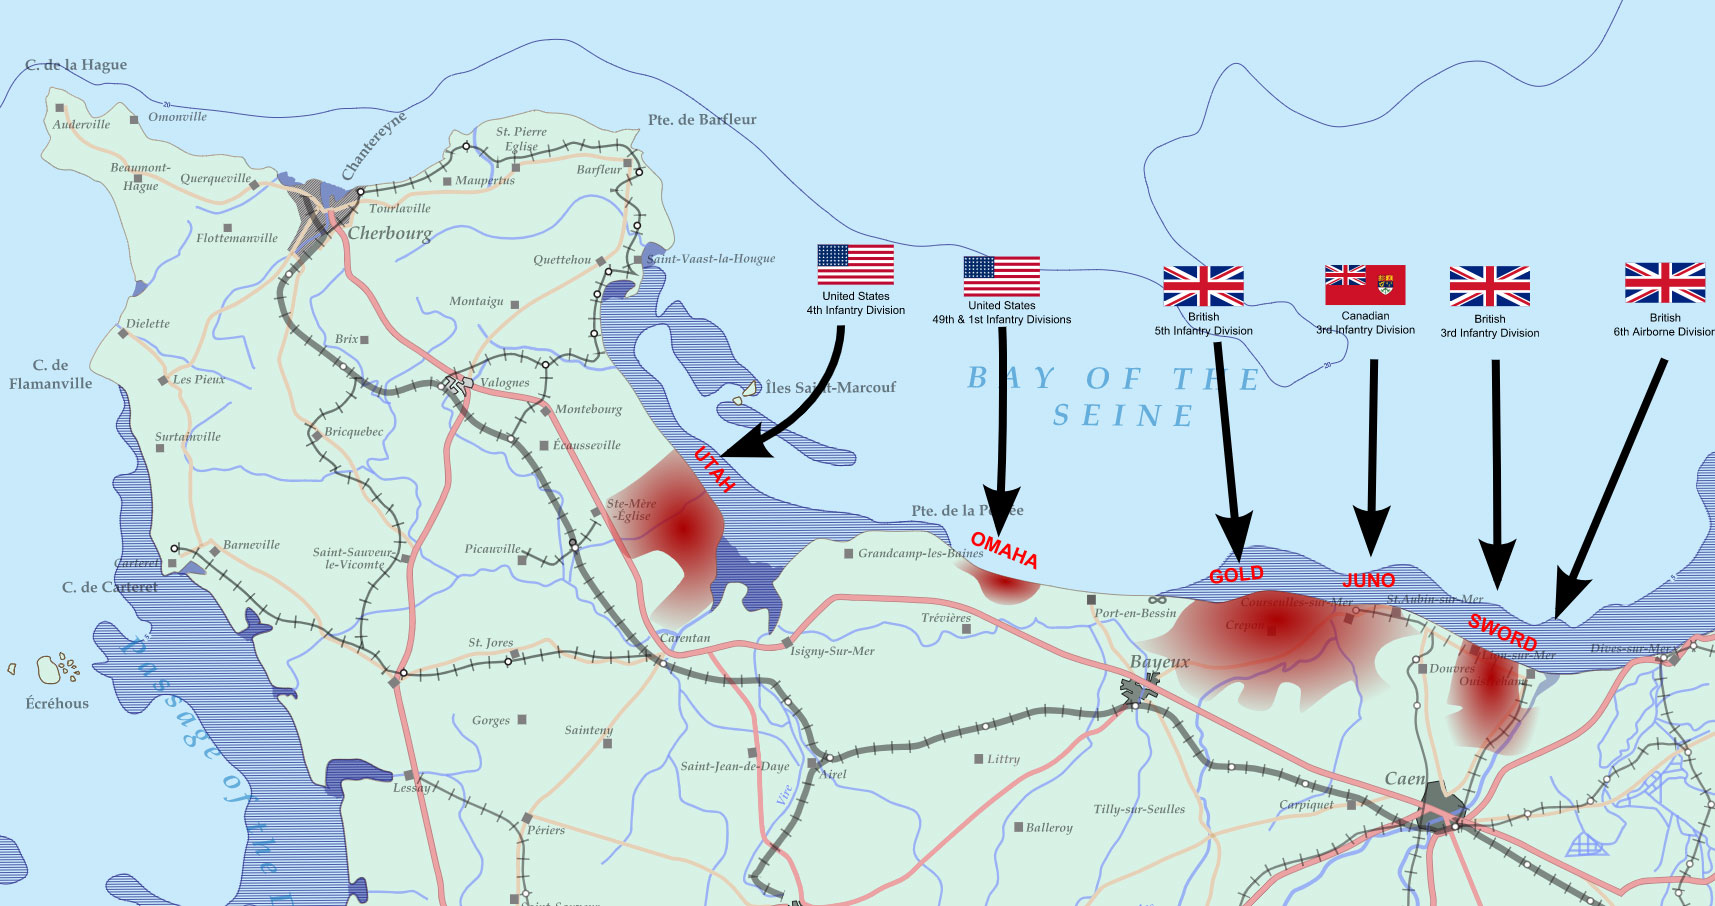 D-Day interactive timeline: how the world-changing events unfolded on 6